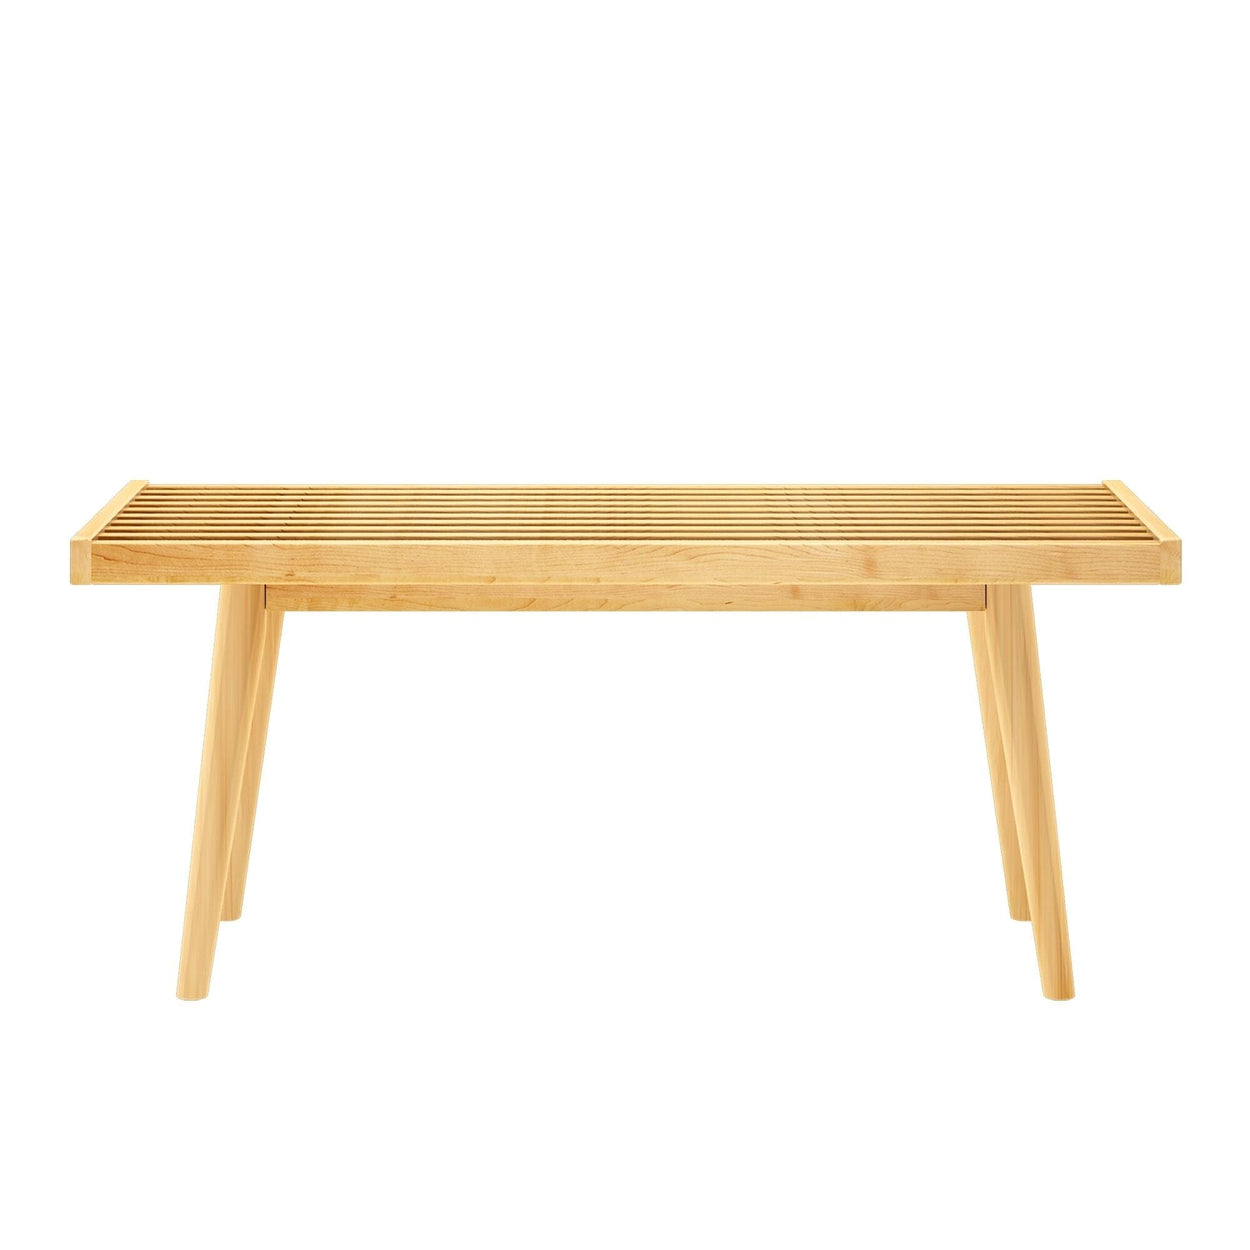 184301-001 : Accessories Mid-Century Modern Twin-Size Bench, Natural